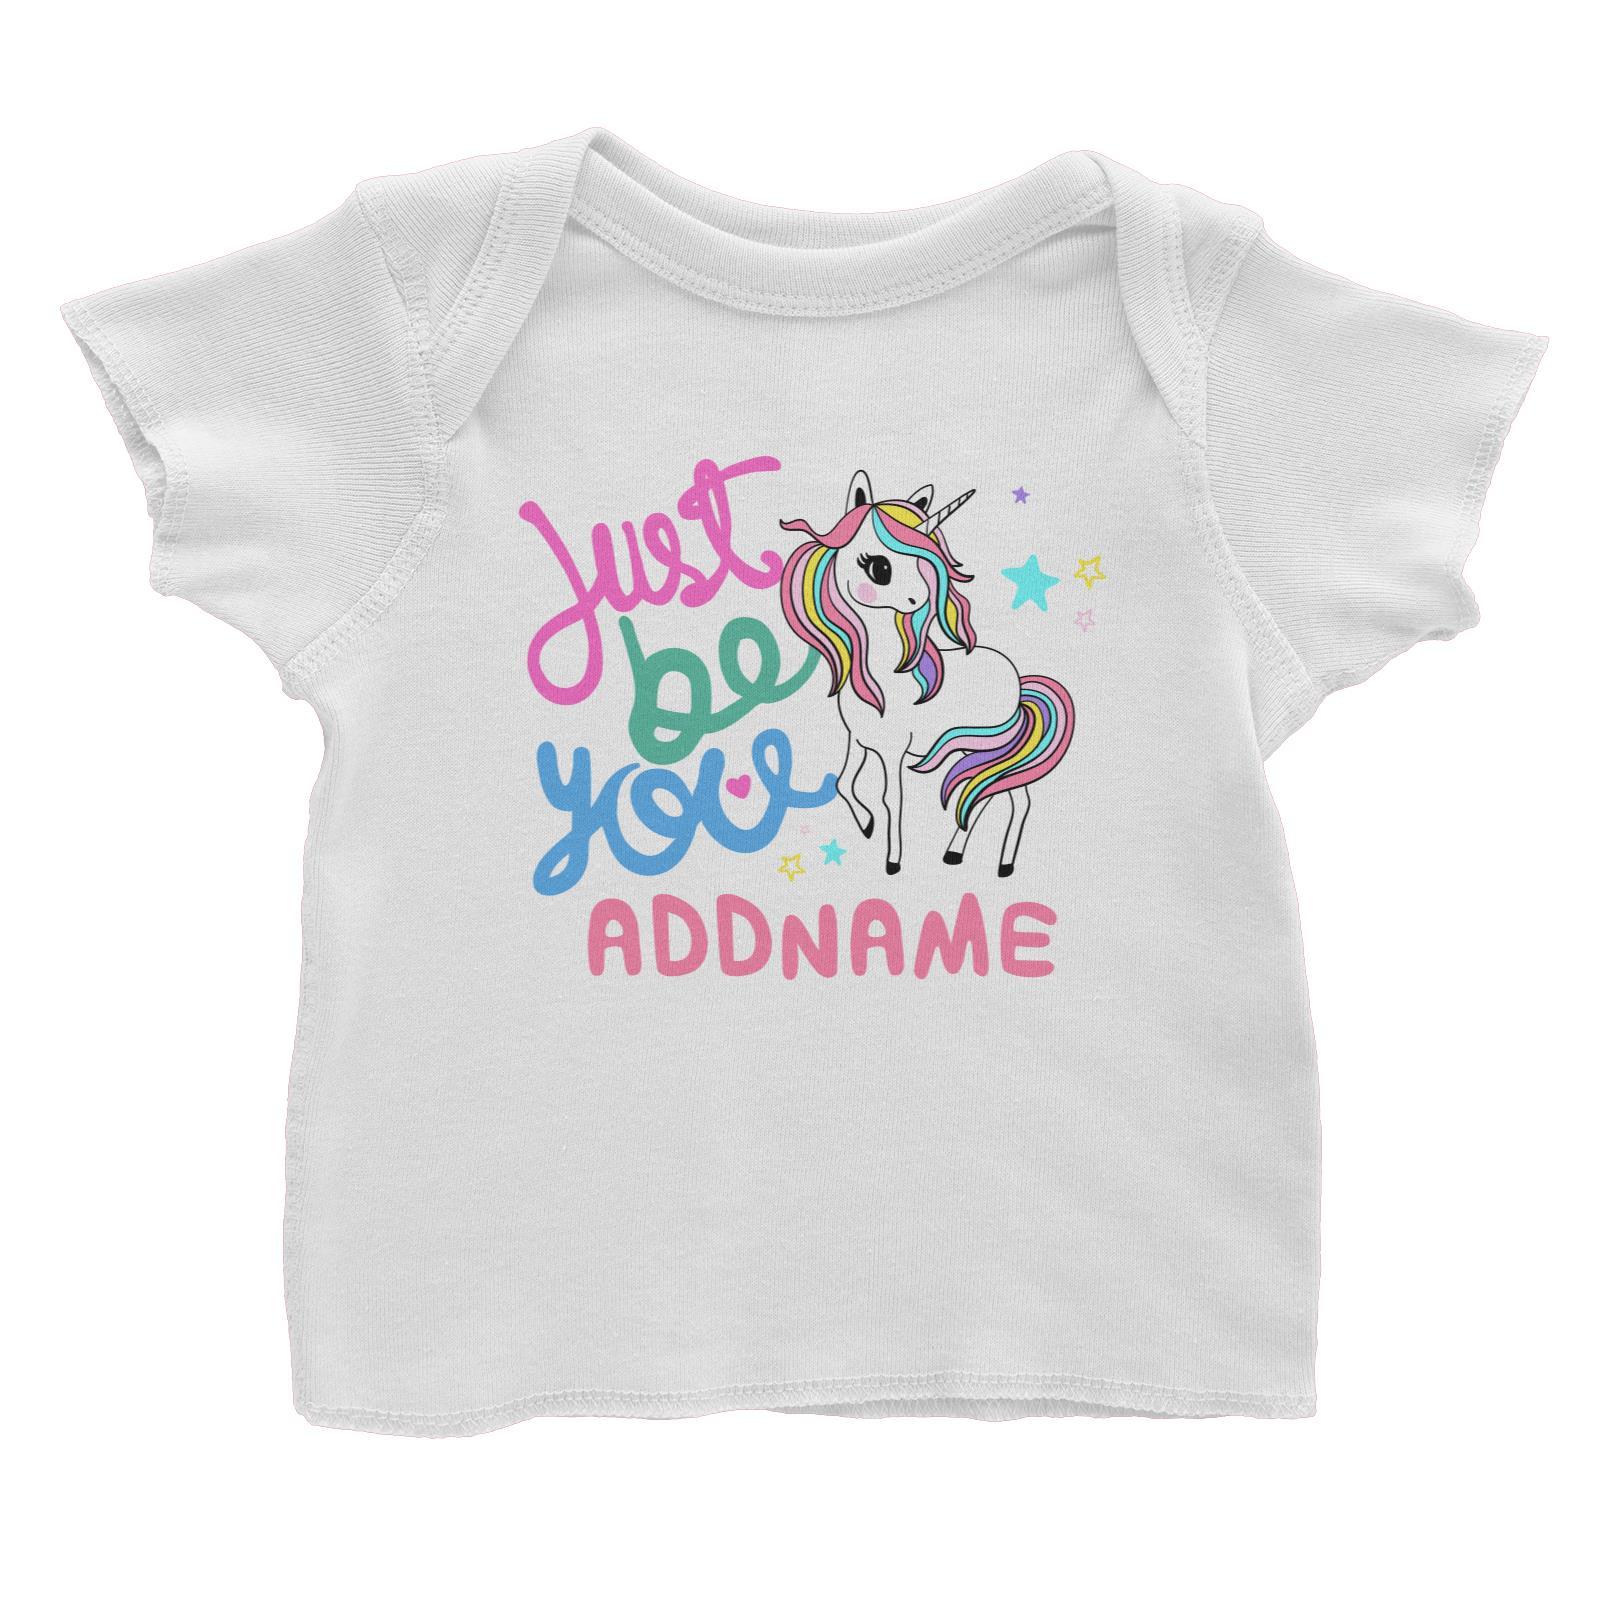 Children's Day Gift Series Just Be You Cute Unicorn Addname Baby T-Shirt